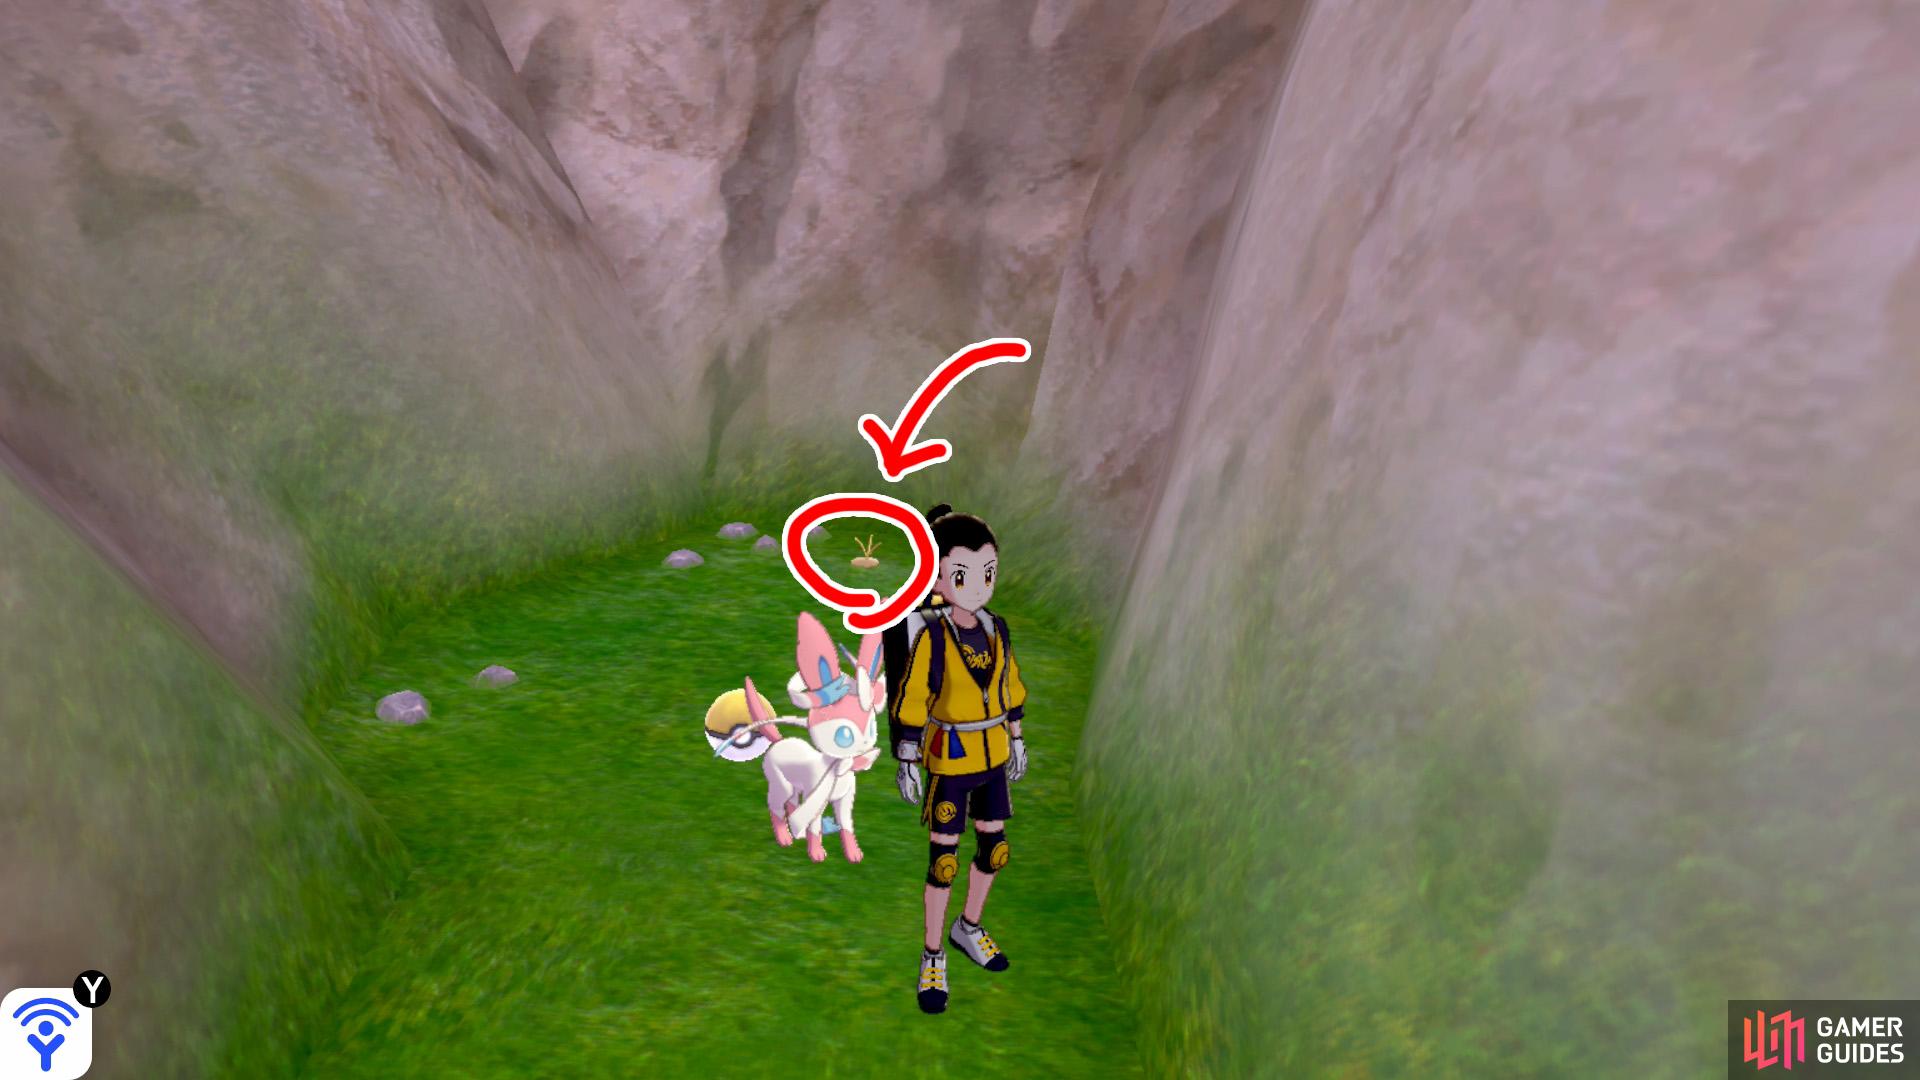 2/3: From Diglett 1, go further into the enclosed area. It's next to some pebbles just past the gold item ball.